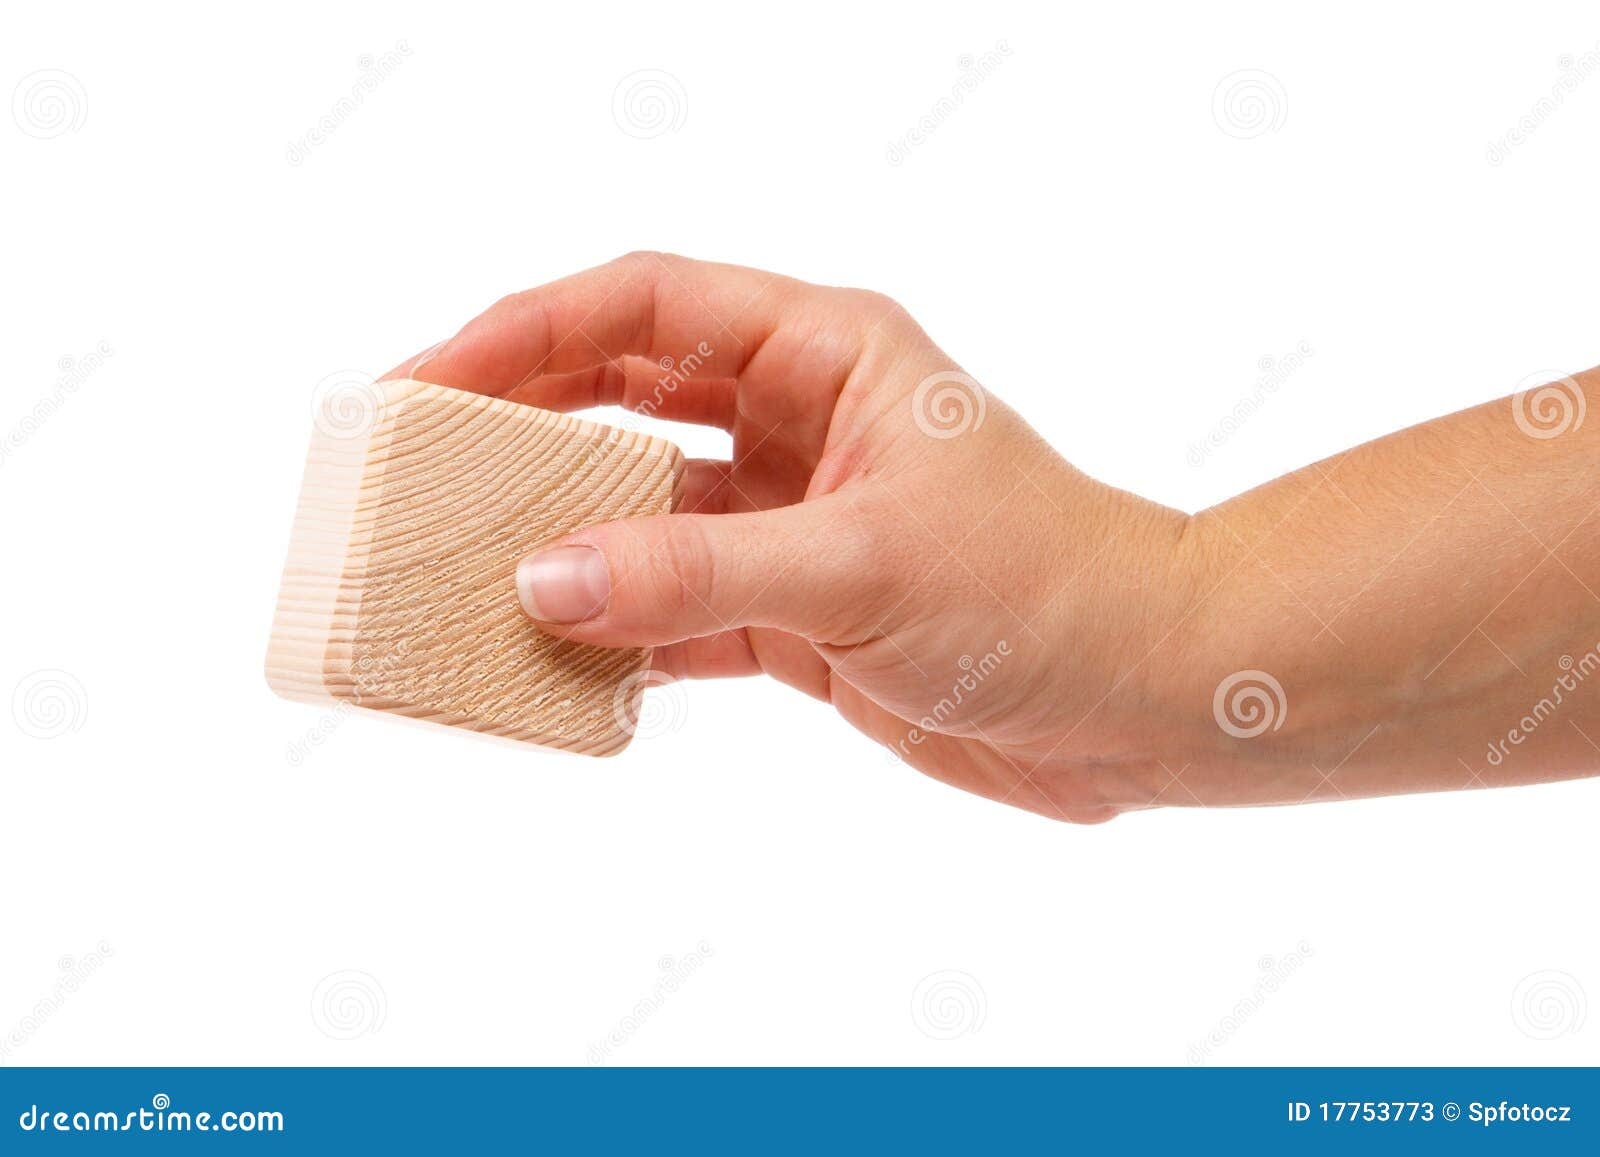 hand with wooden block